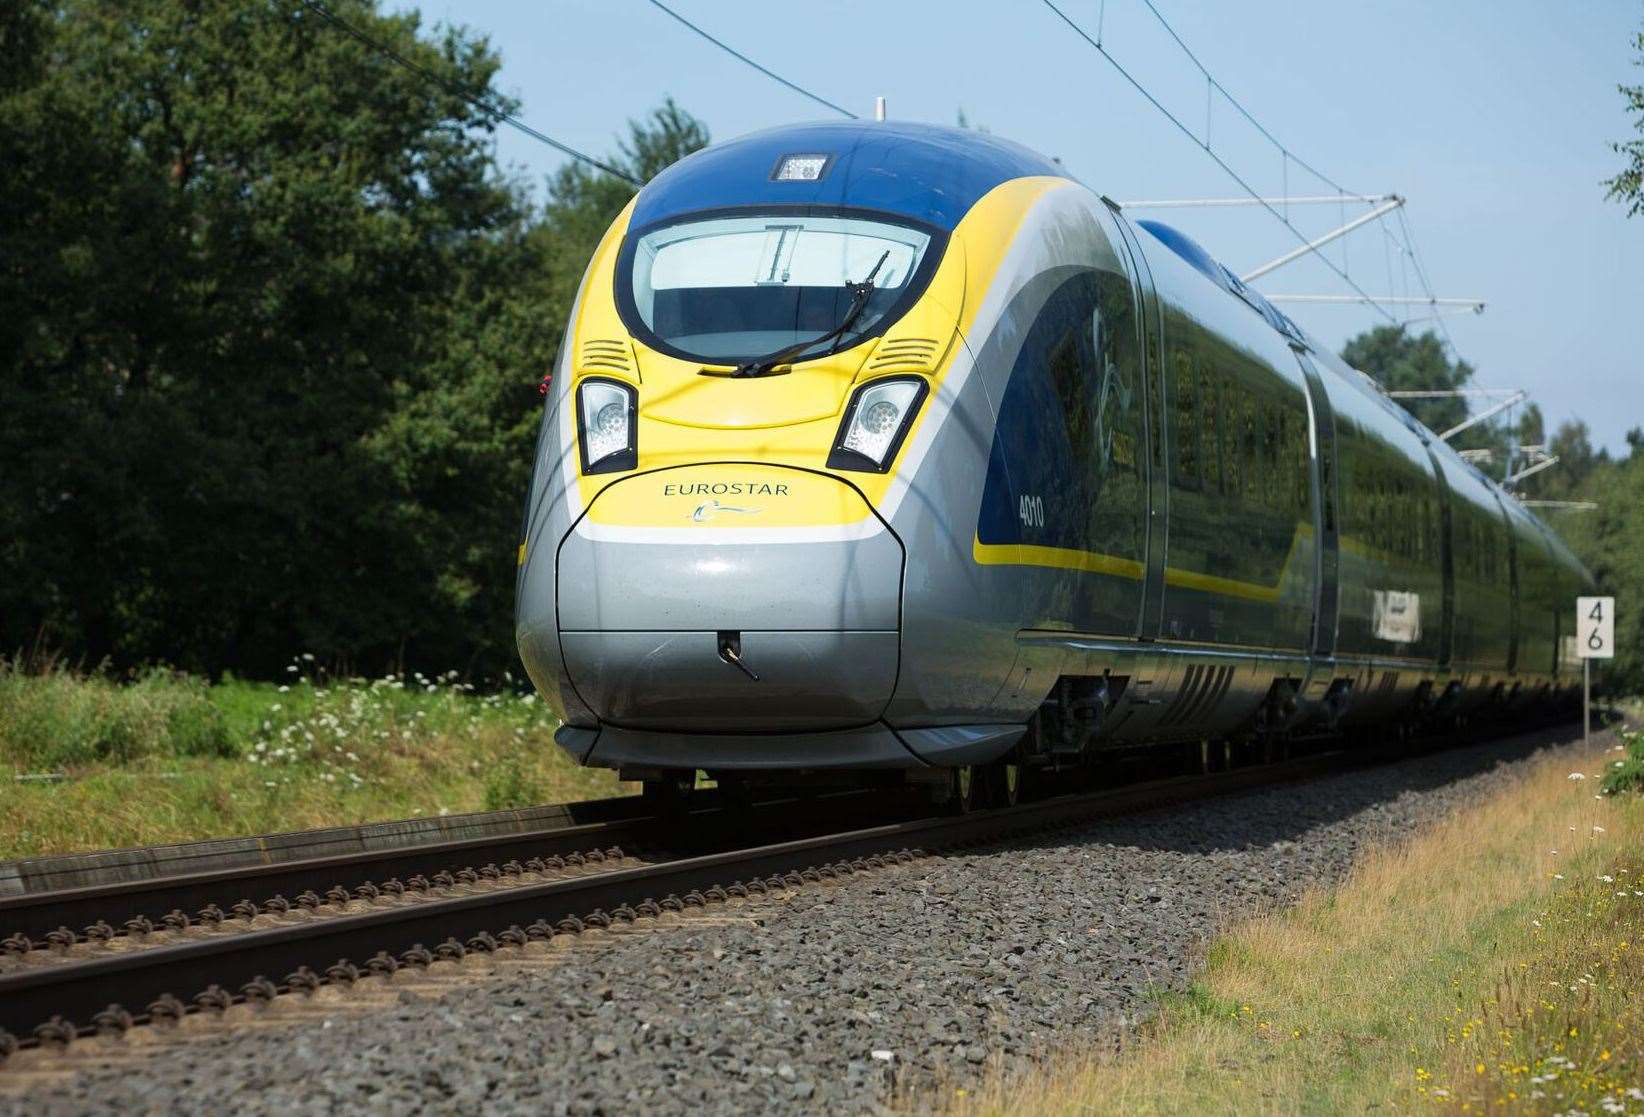 Eurostar once had a relationship with Kent - then it ran off with London